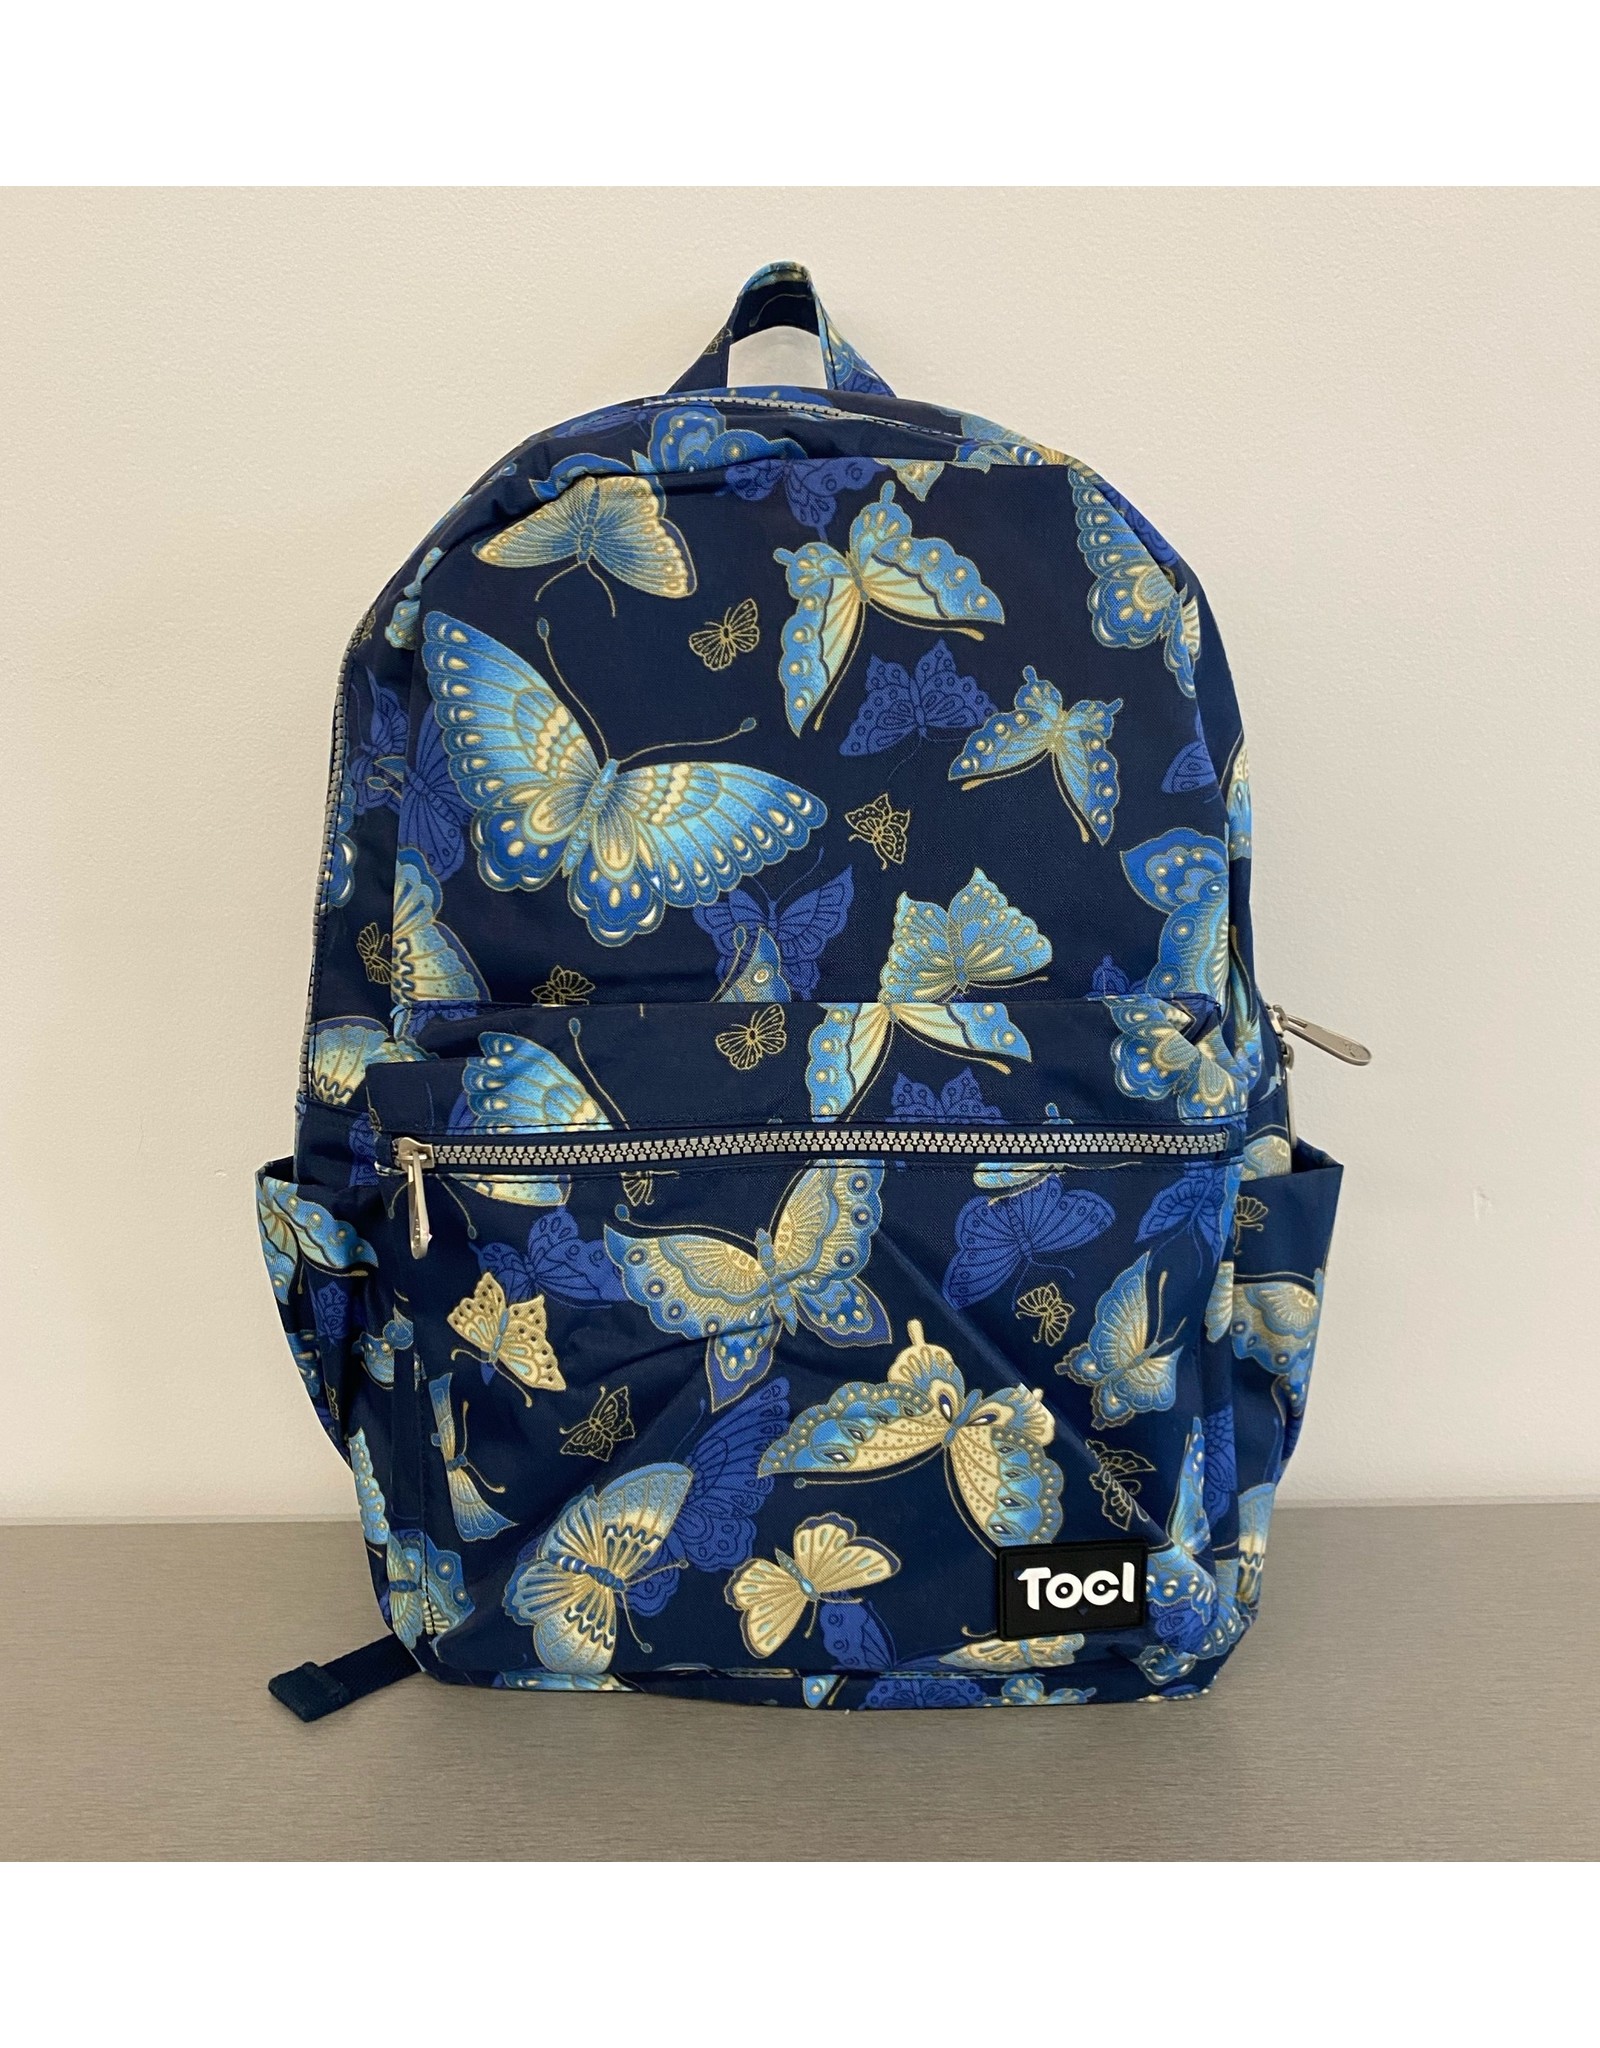 Toci - Blue Butterfly Backpack